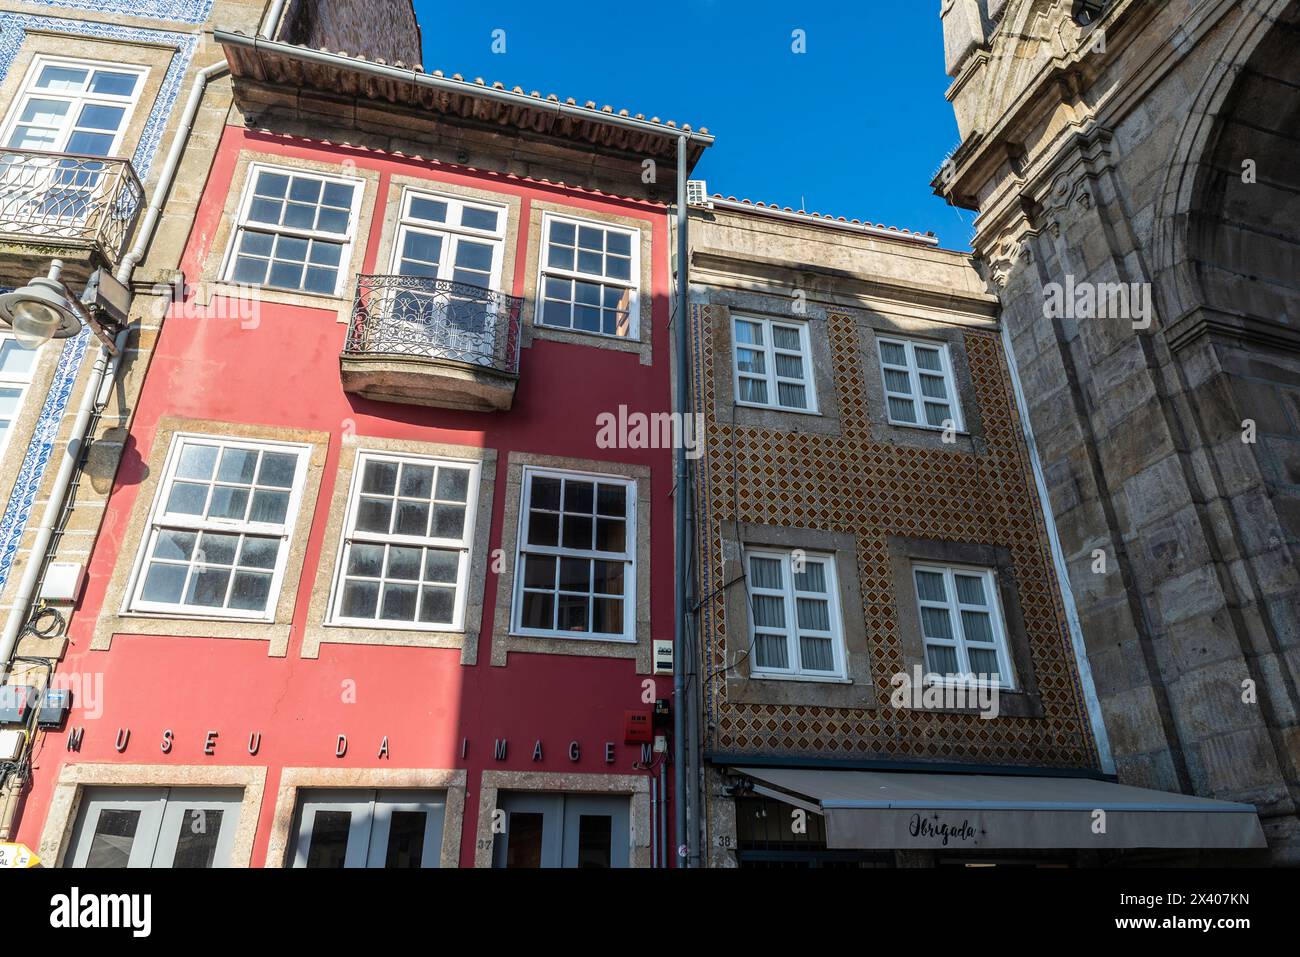 Braga, Portugal - November 25, 2023: Facade of the Image Museum in the old town of Braga, Portugal Stock Photo